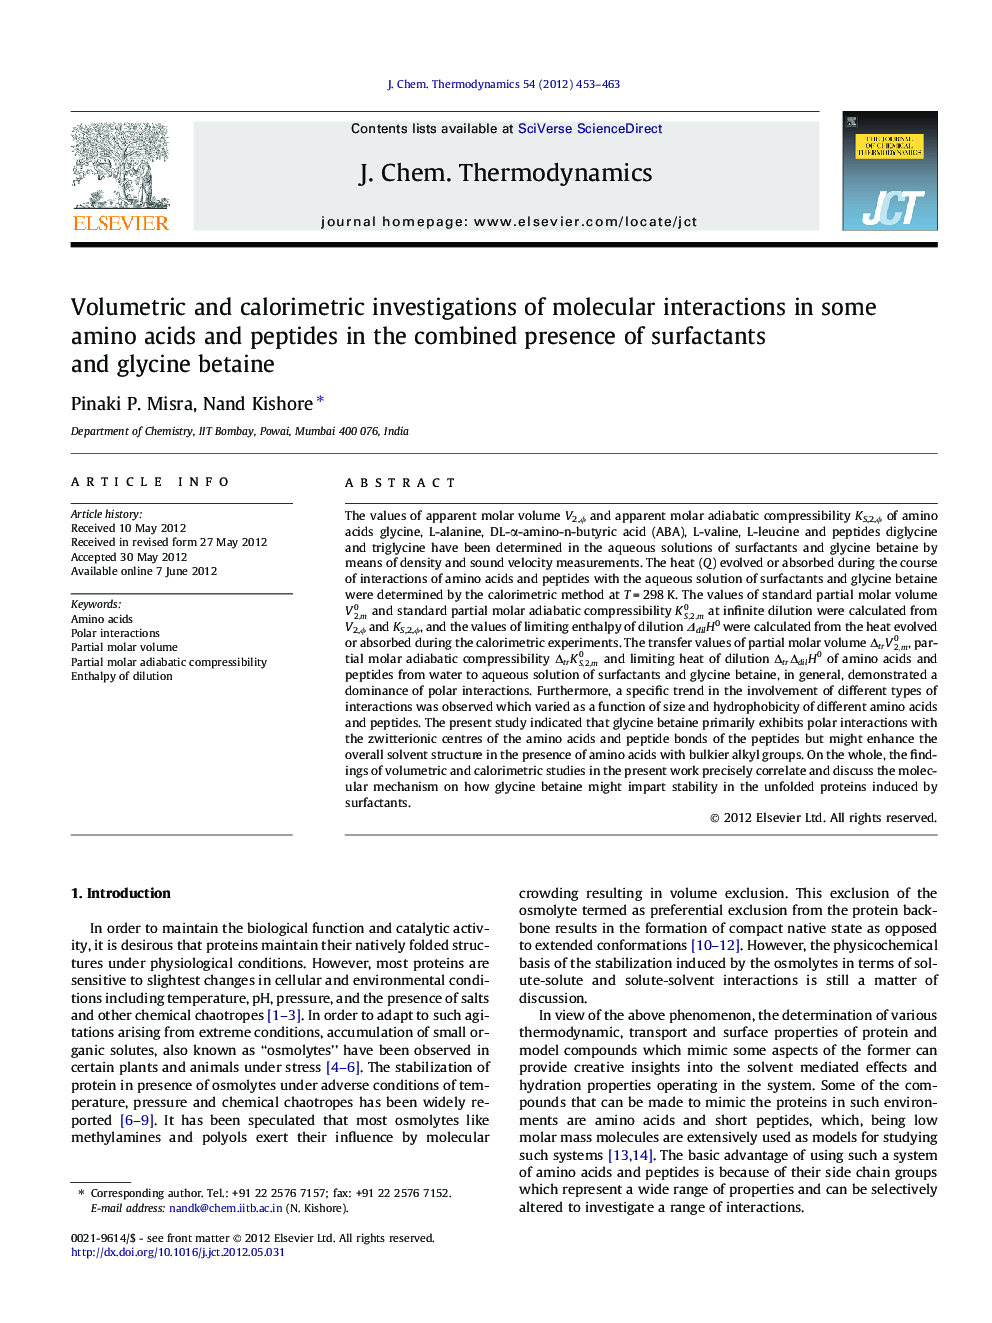 Volumetric and calorimetric investigations of molecular interactions in some amino acids and peptides in the combined presence of surfactants and glycine betaine